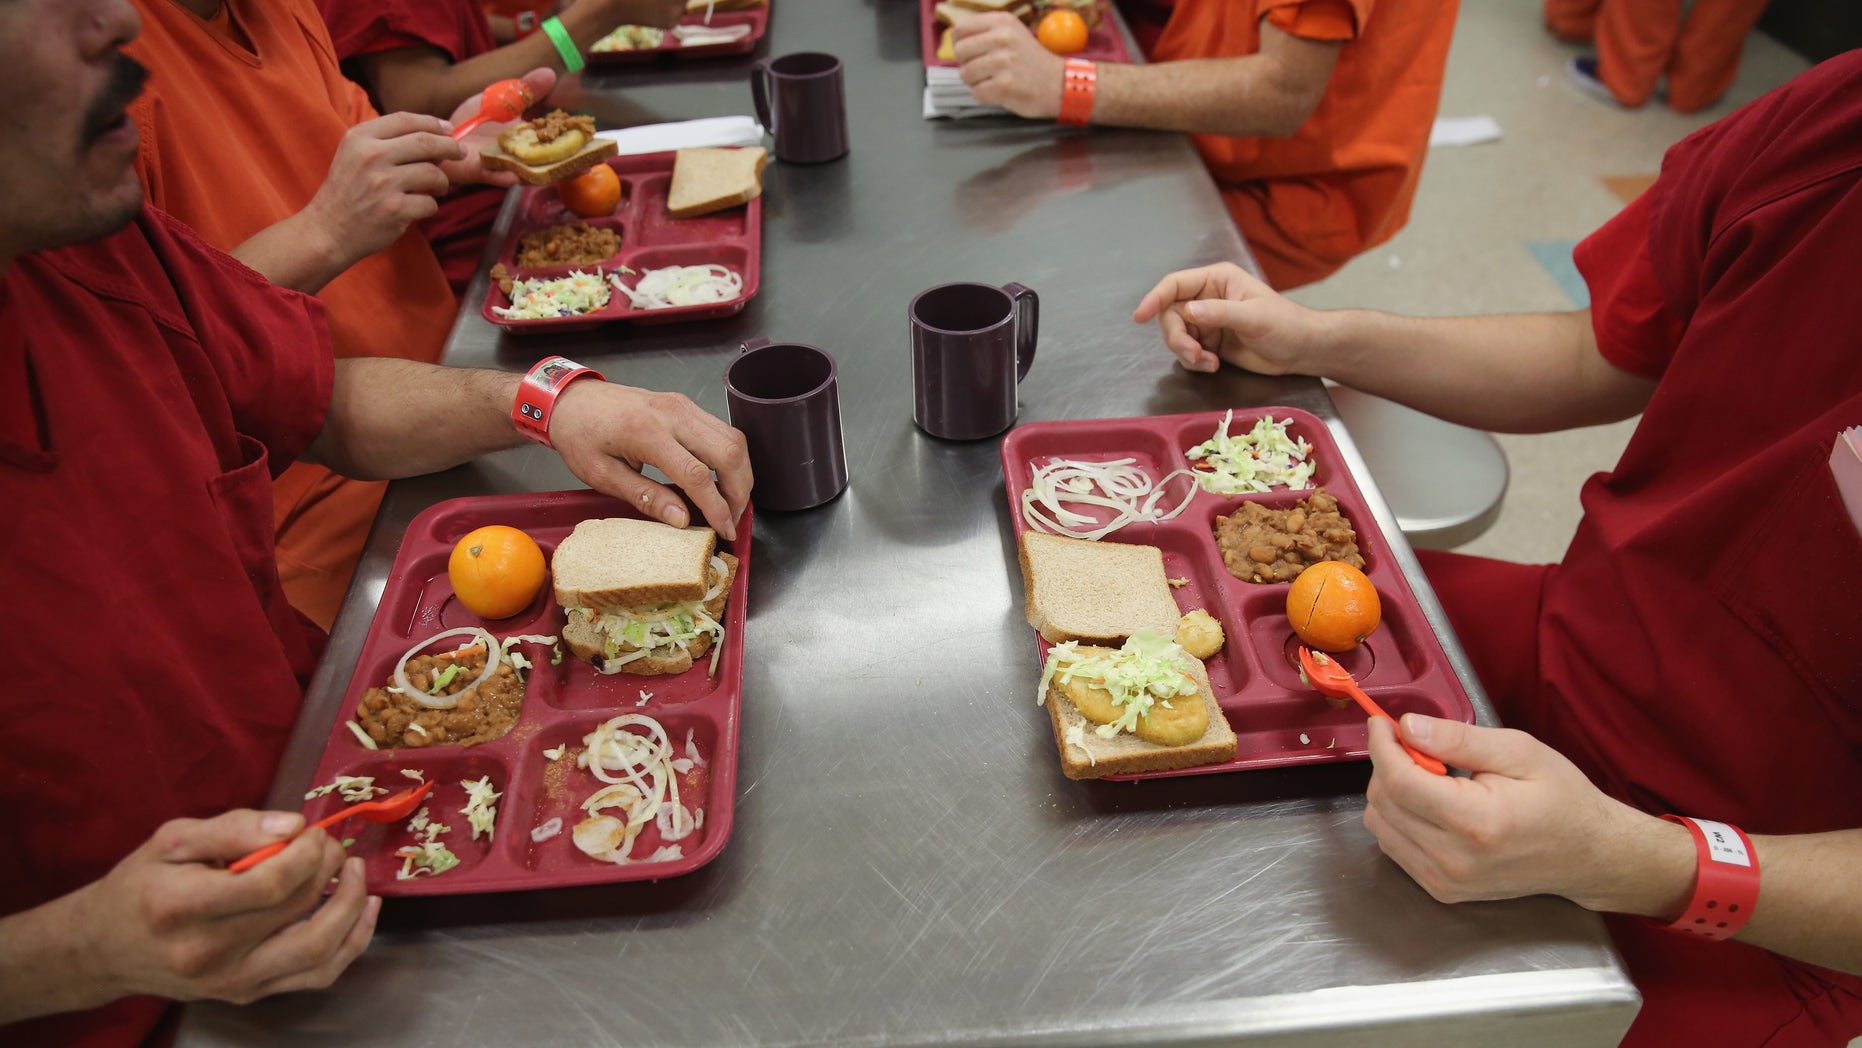 New Mexico Corrections Facility Cook Facing Battery Charges For